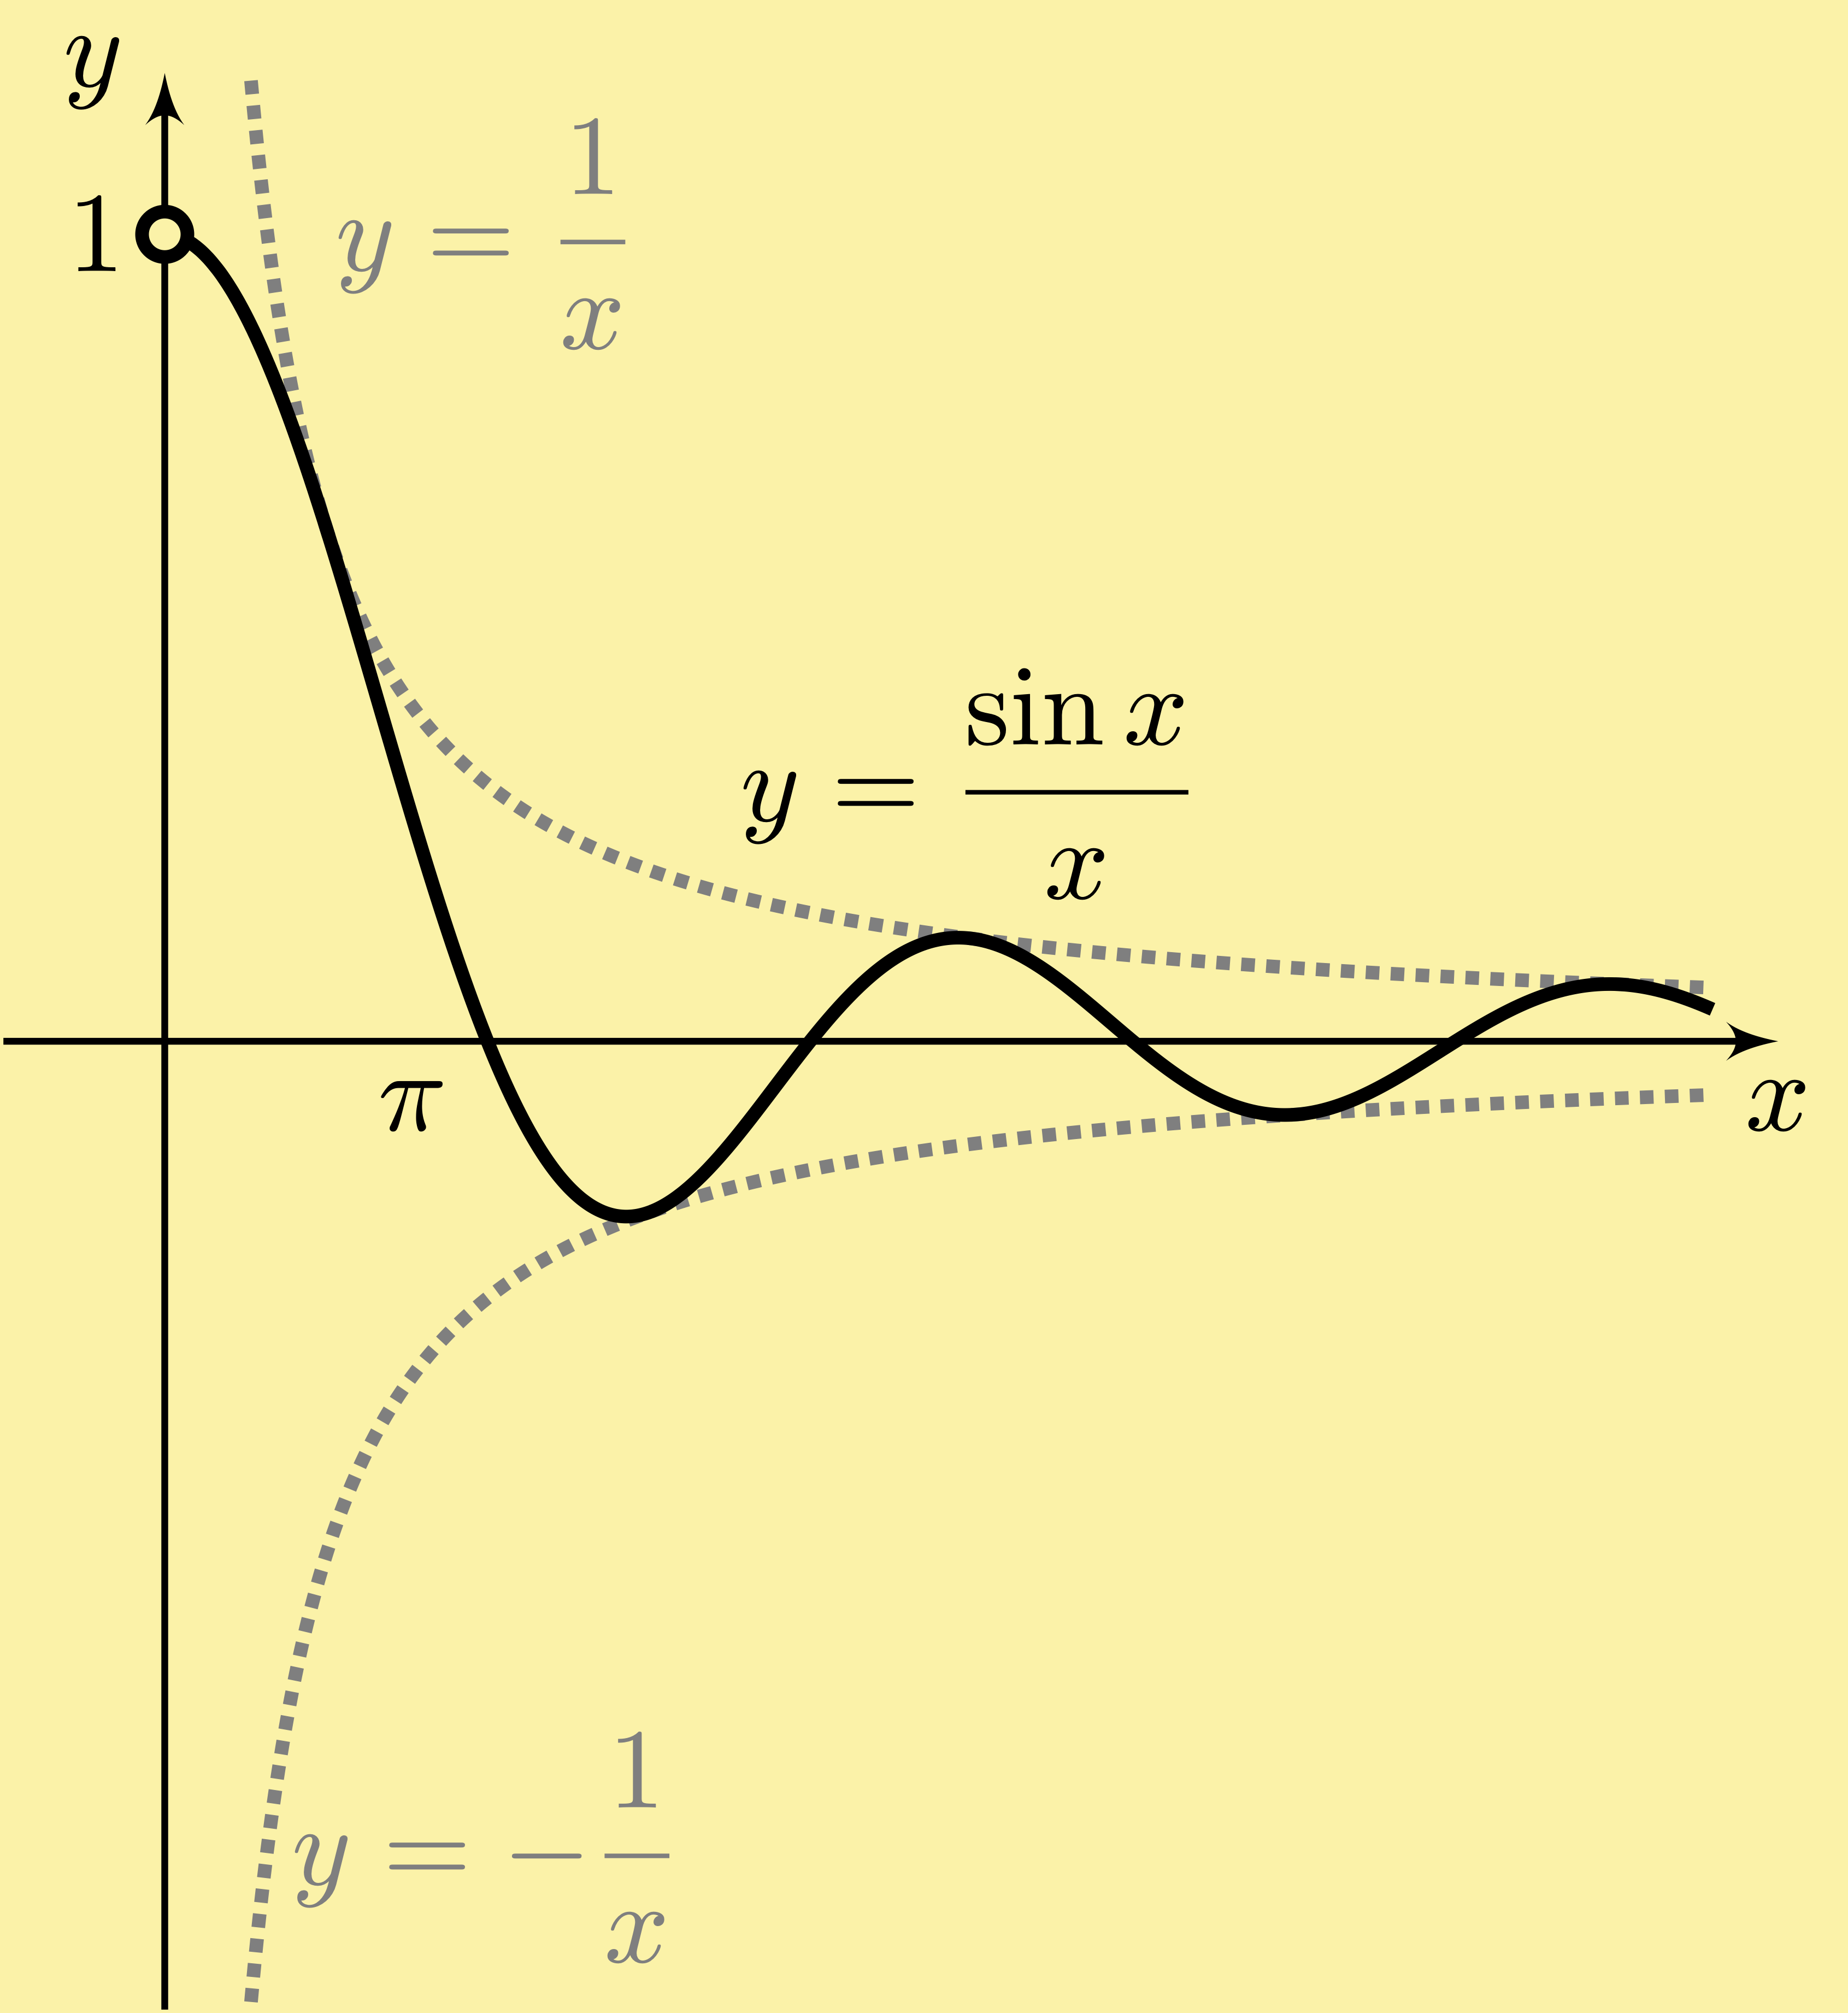 Squeeze Theorem for functions